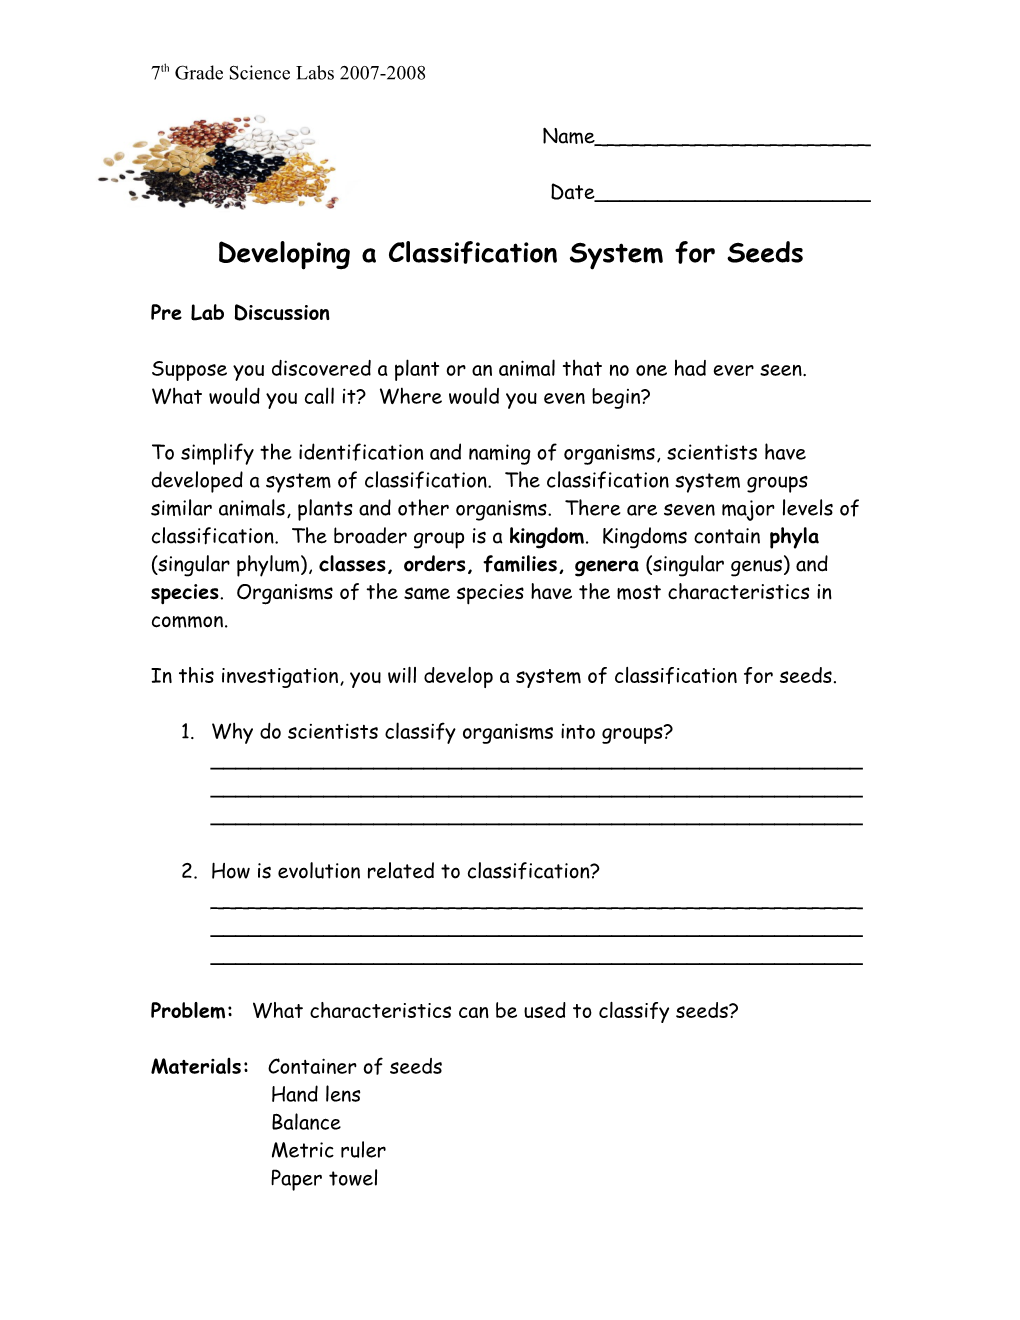 Developing a Classification System for Seeds